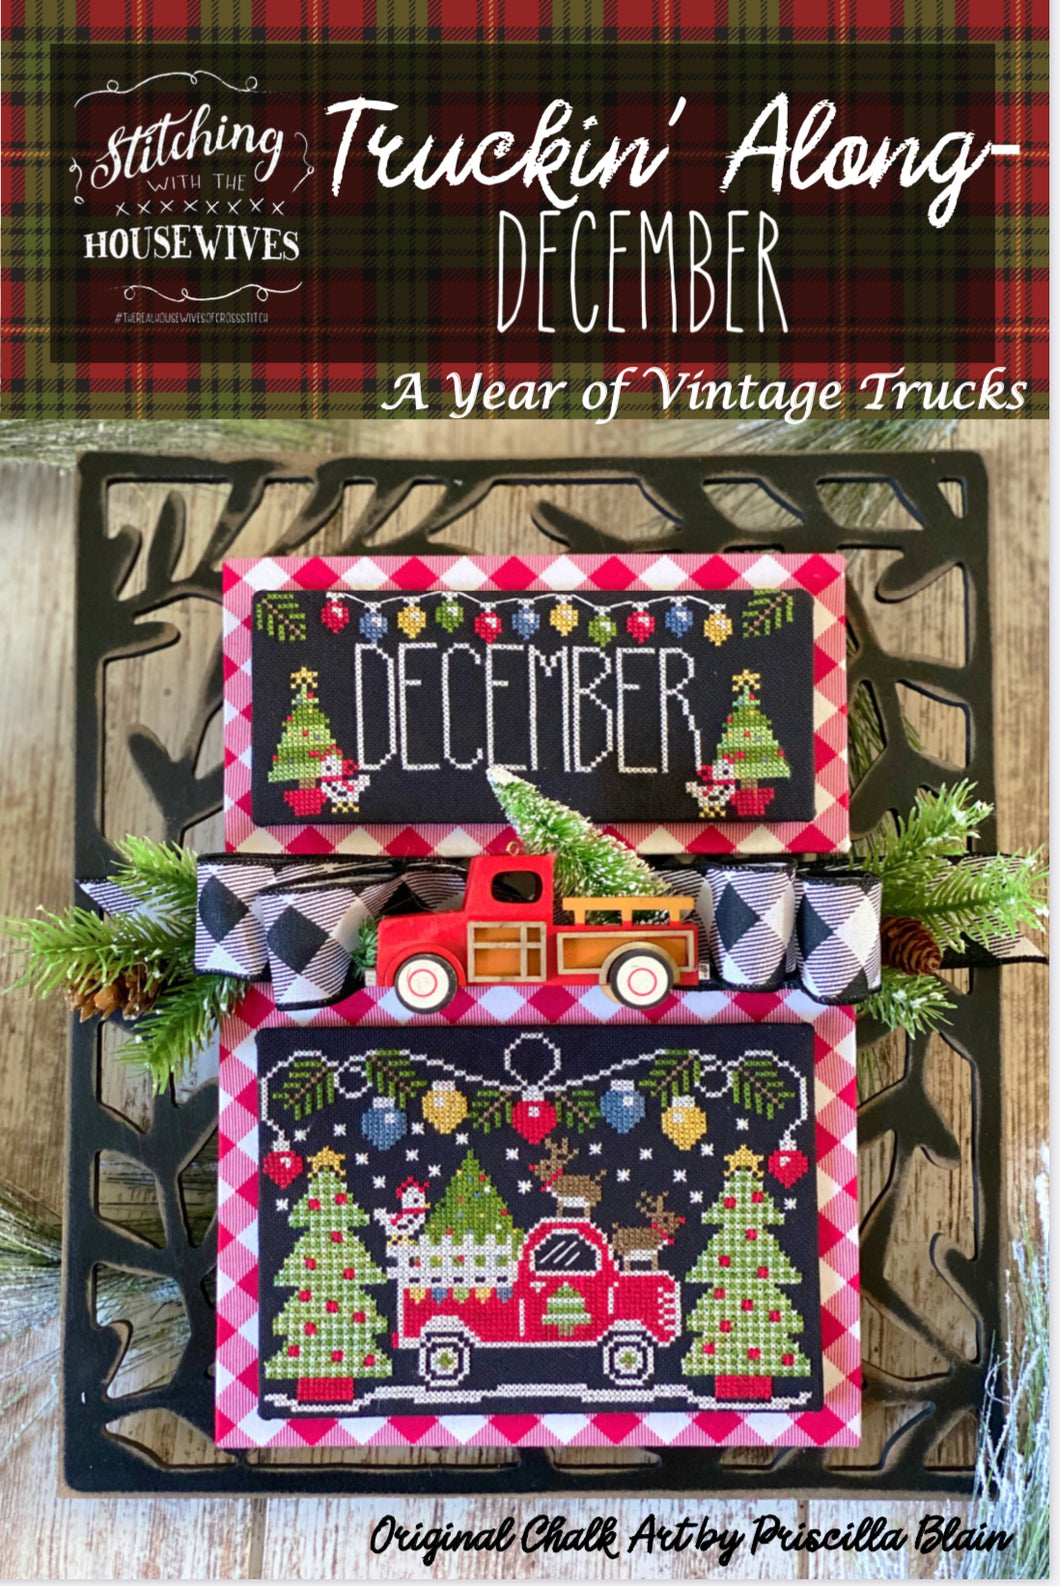 Truckin' Along - December by Stitching With the Housewives